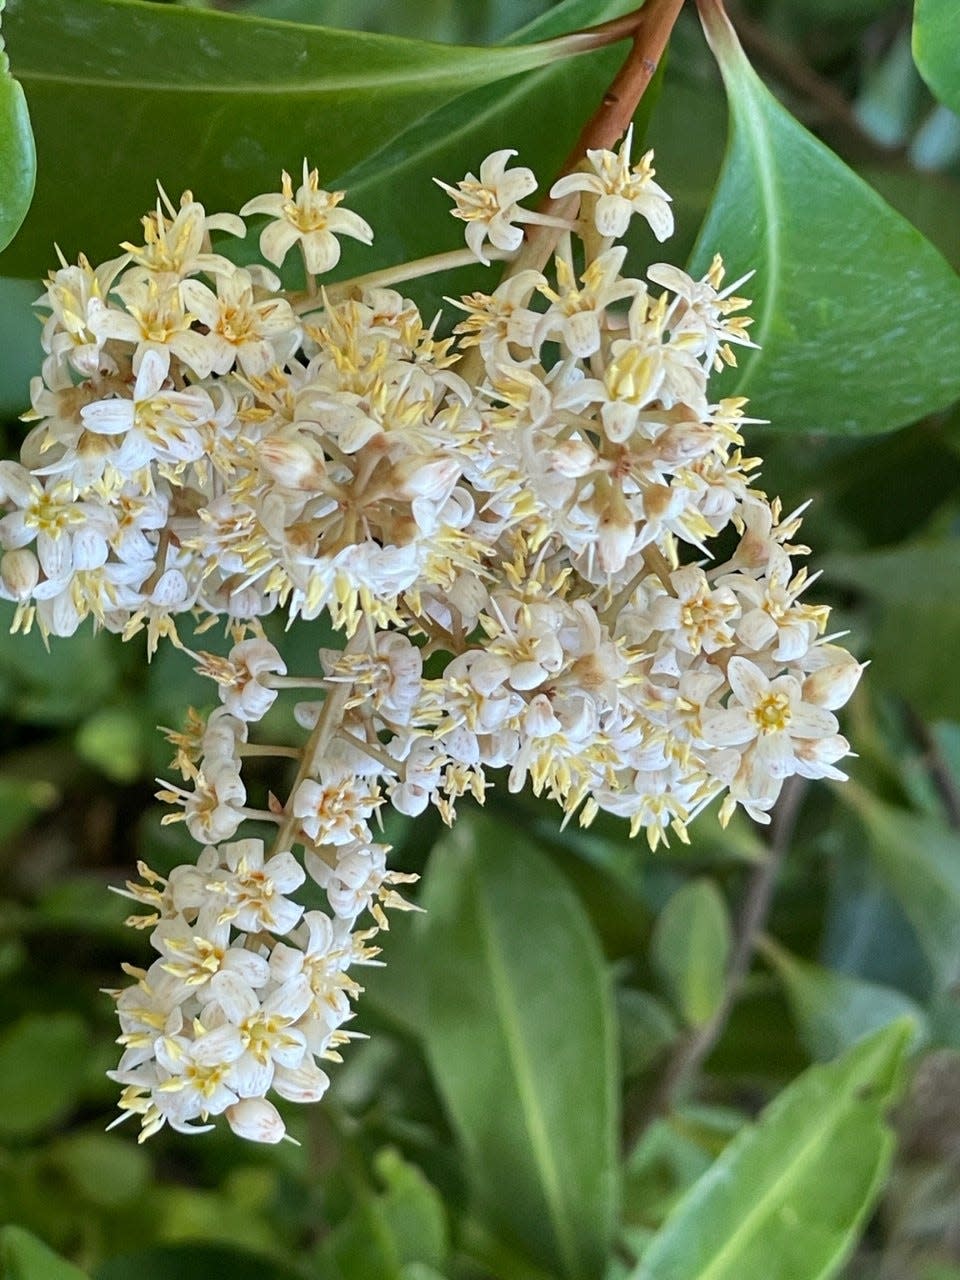 The flowers of the marlberry are fragrant. The shrub does well in shade.